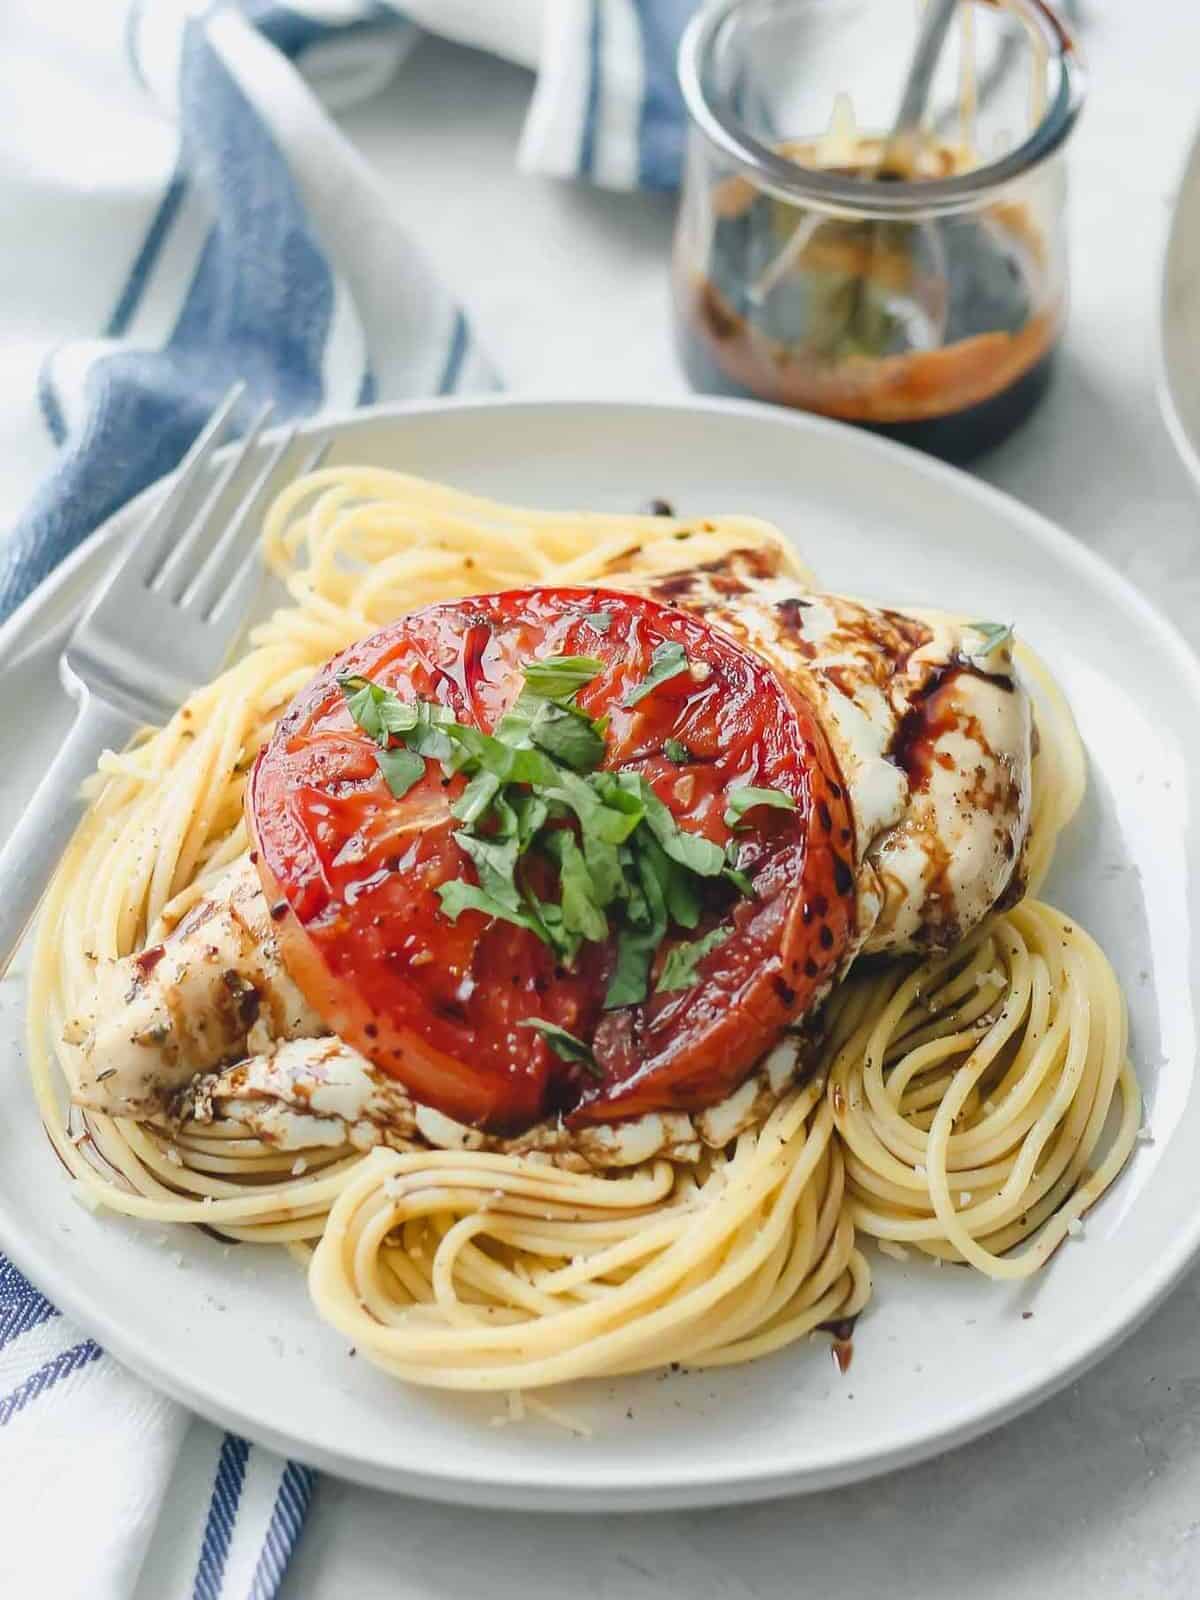 chicken breasts topped with mozzarella and tomatoes on a bed of spaghetti.